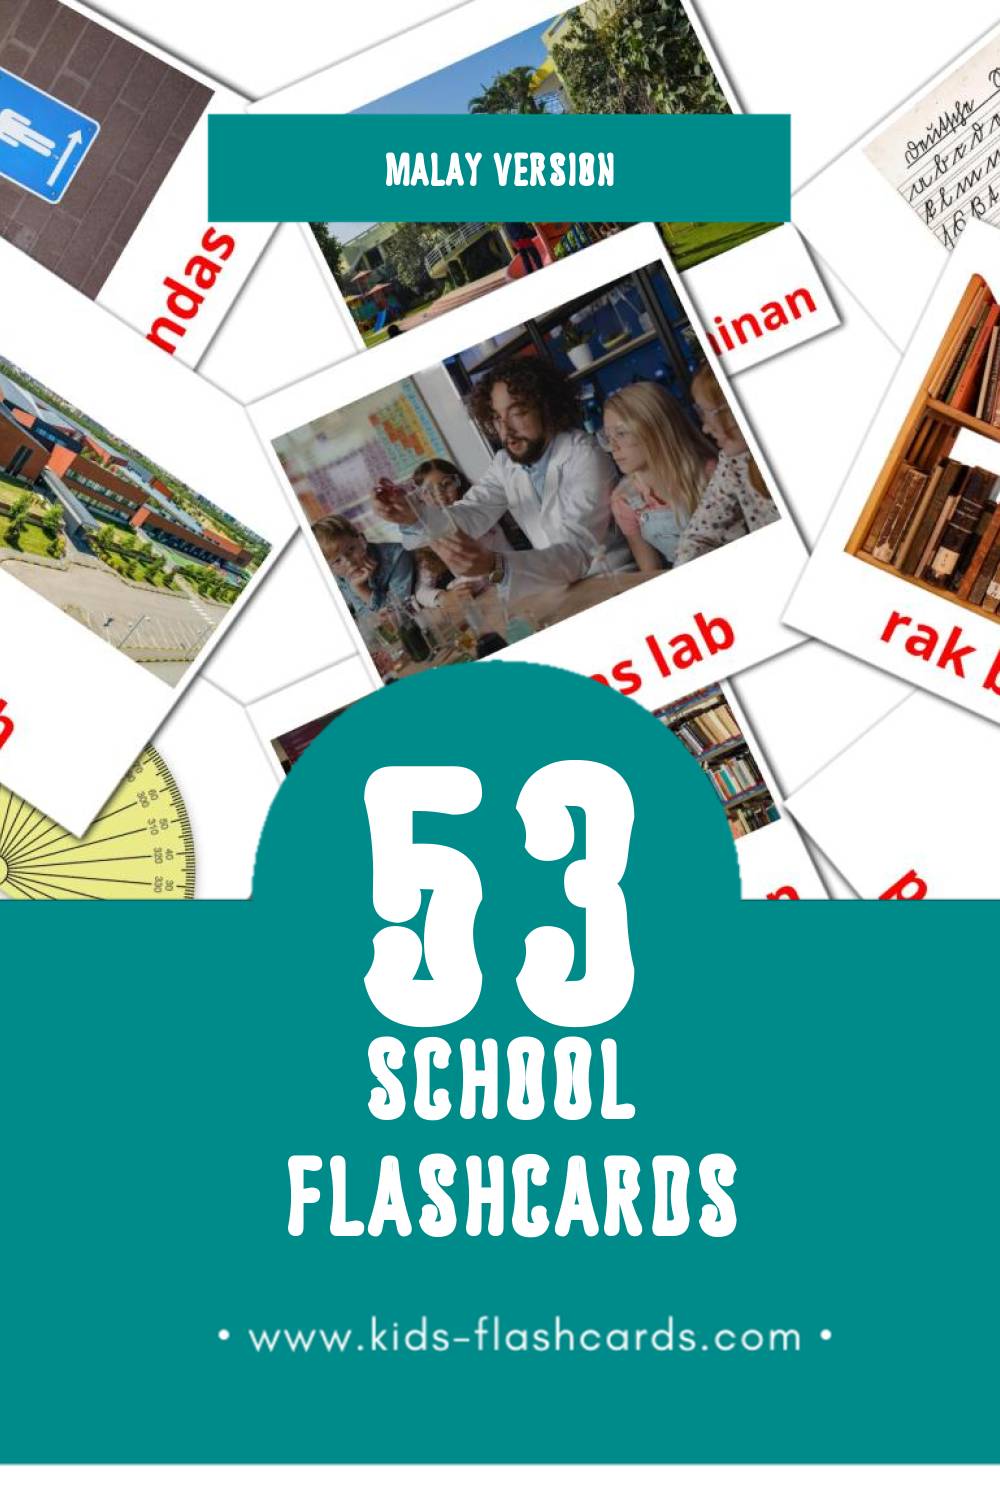 Visual Sekolah Flashcards for Toddlers (17 cards in Malay)